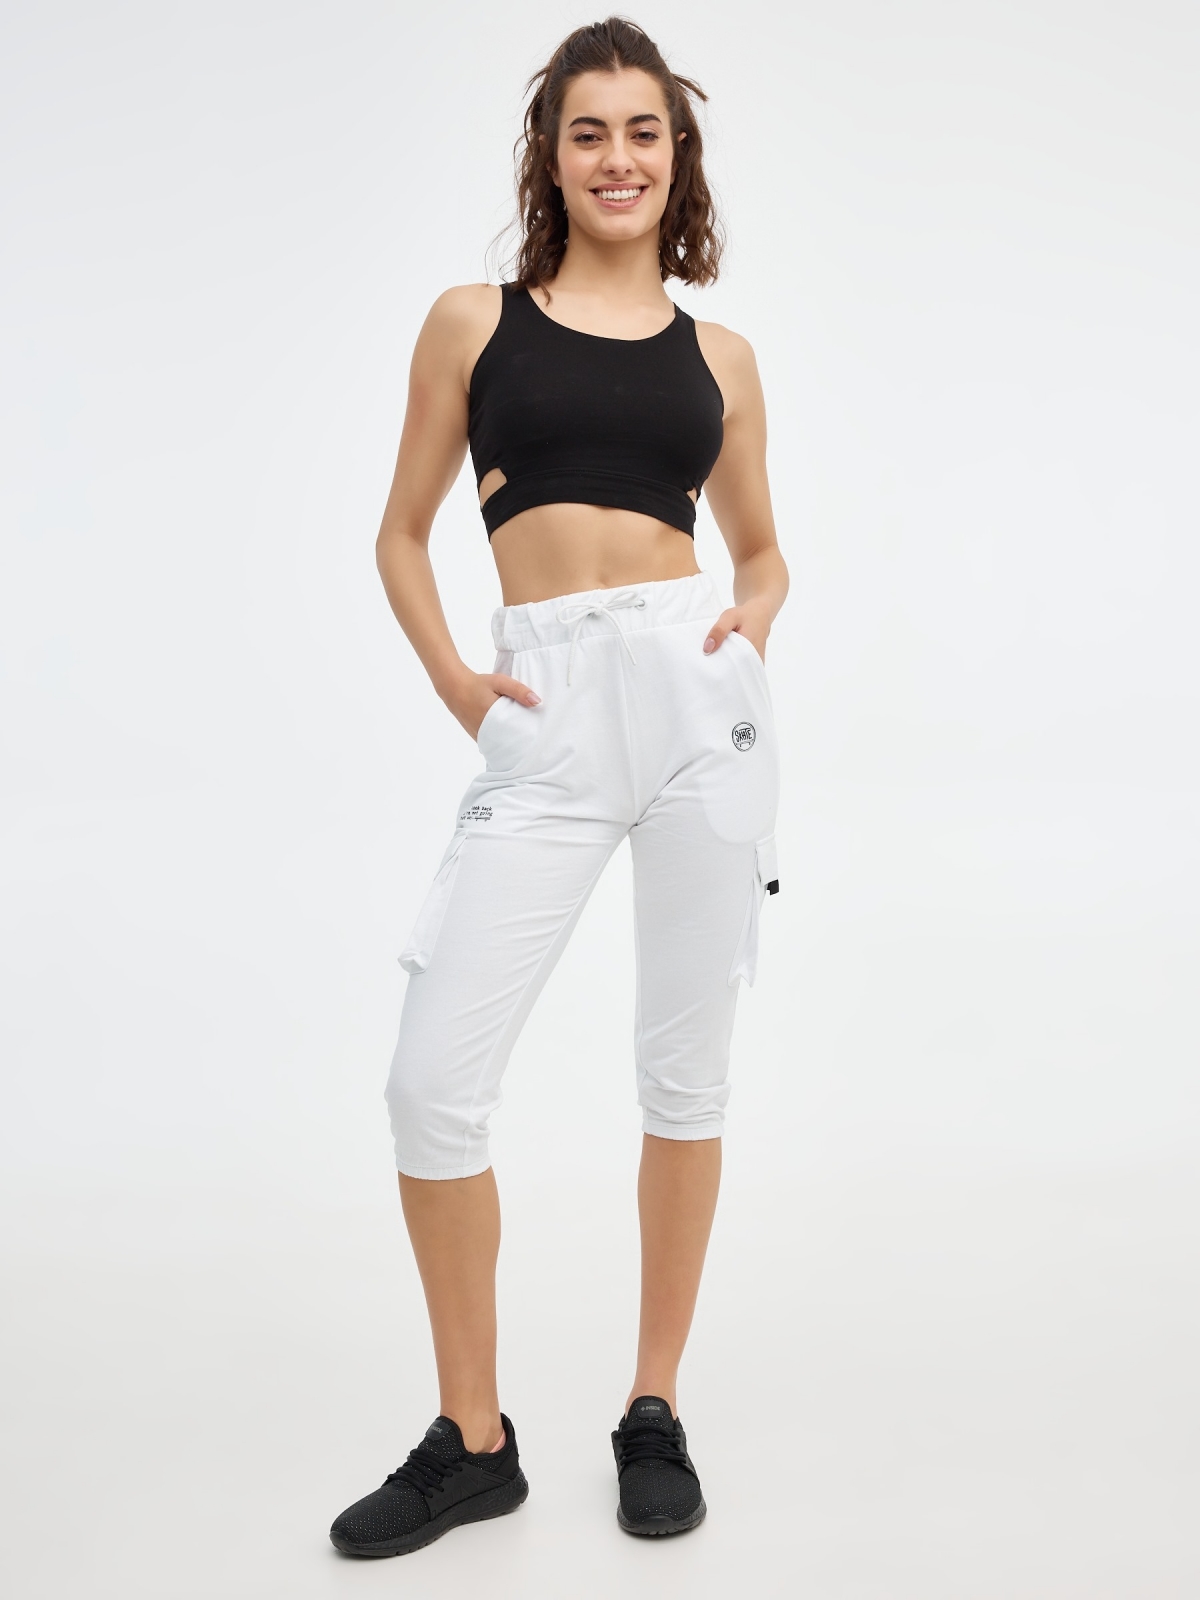 Jogger pants with pockets white middle front view